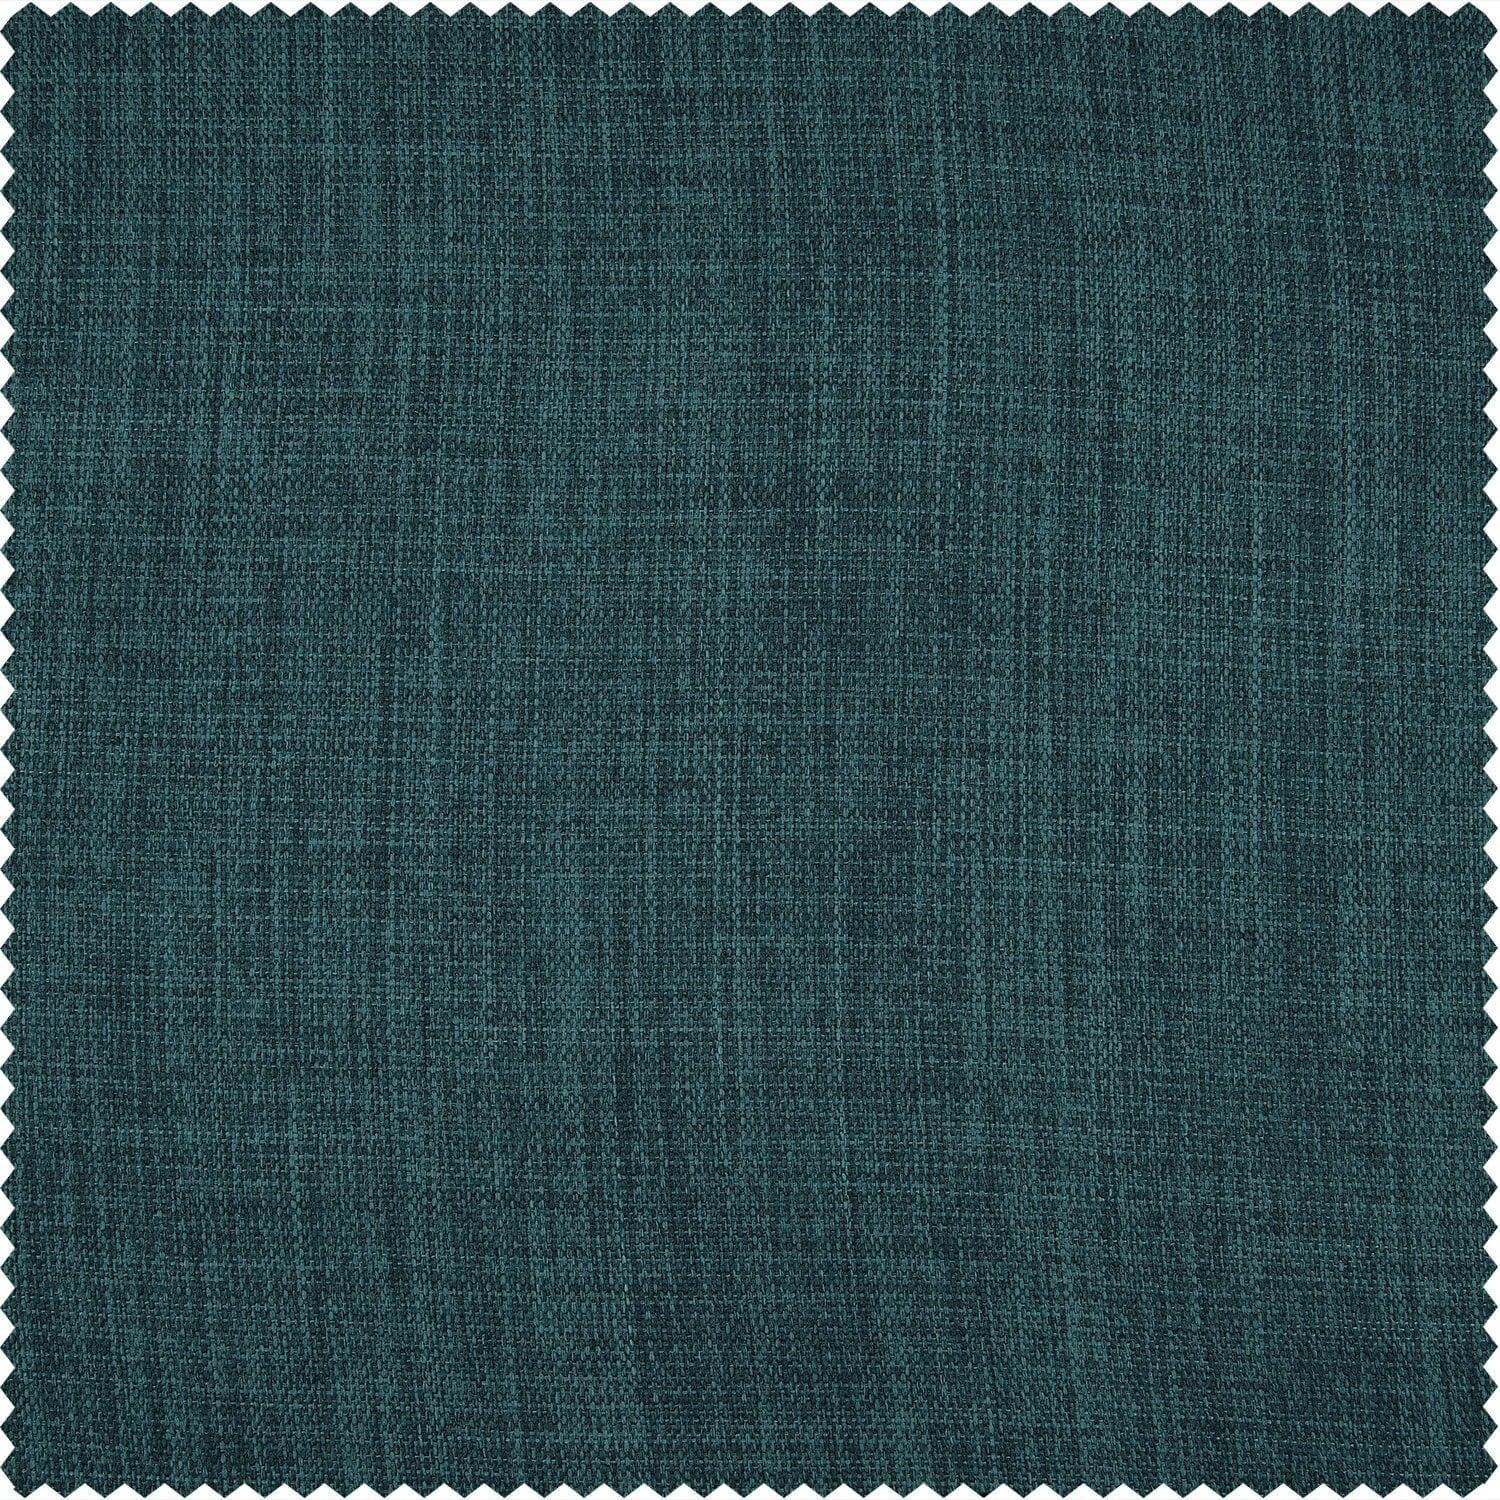 Slate Teal Green Textured Faux Linen Tie-Up Window Shade